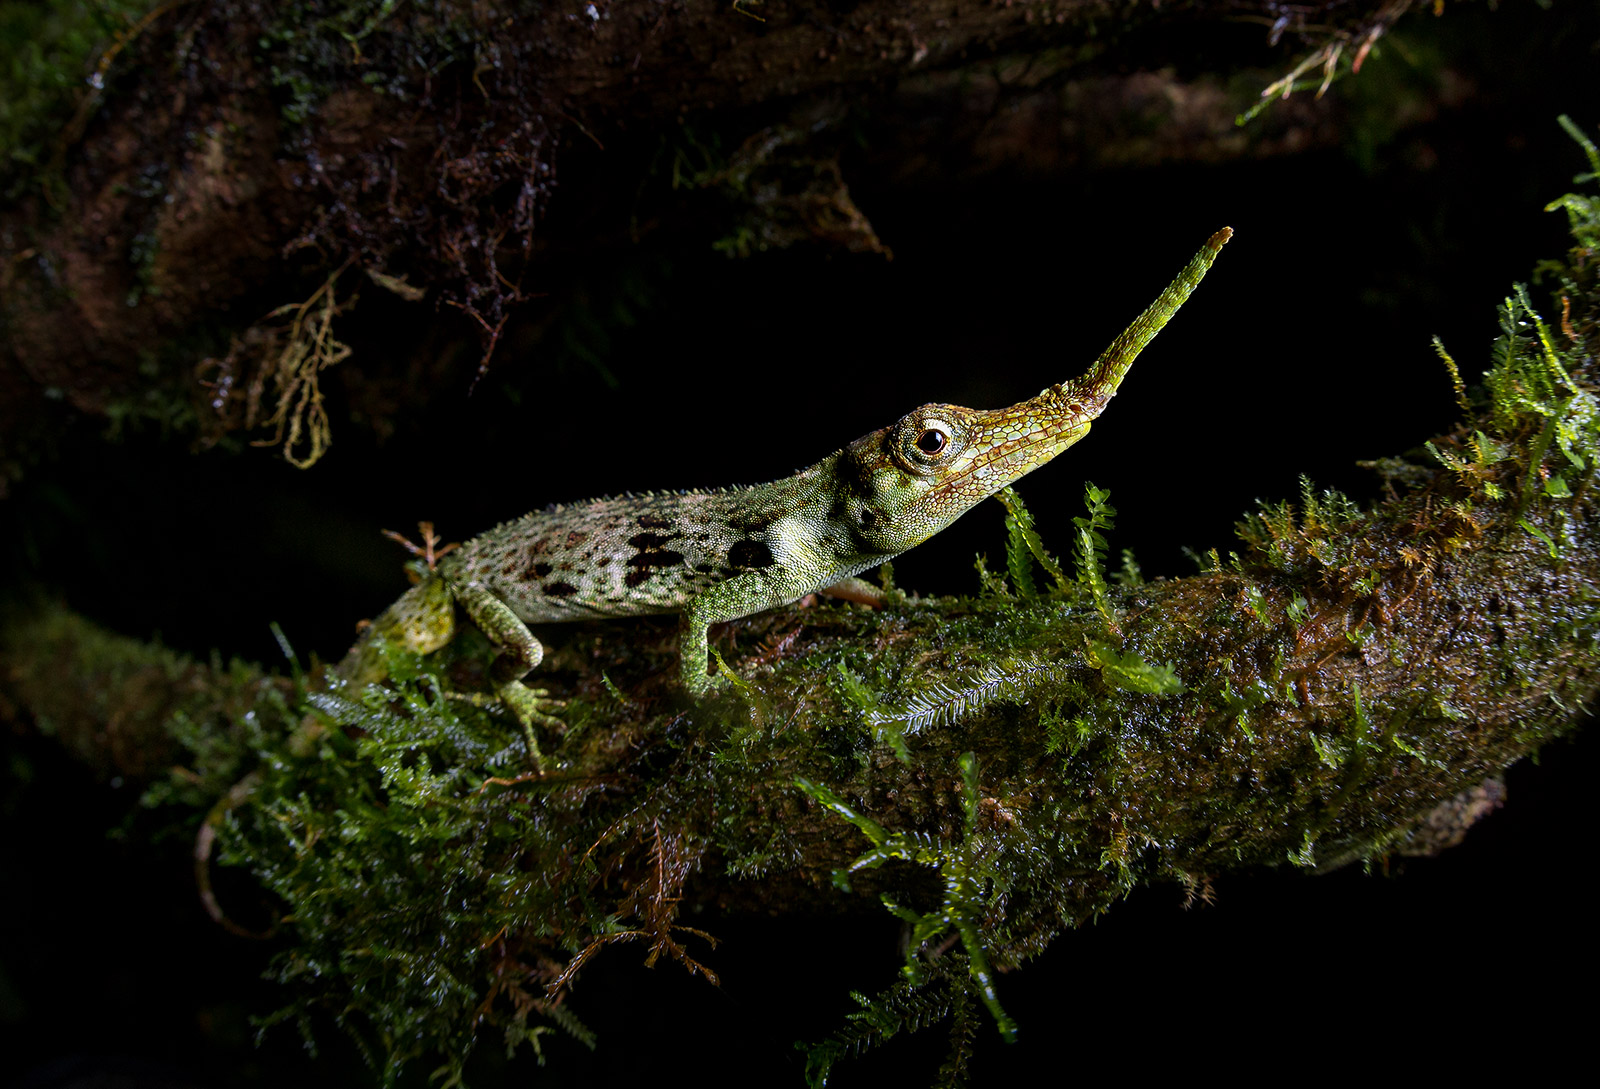 Image of an adult male of the Pinocchio Anole